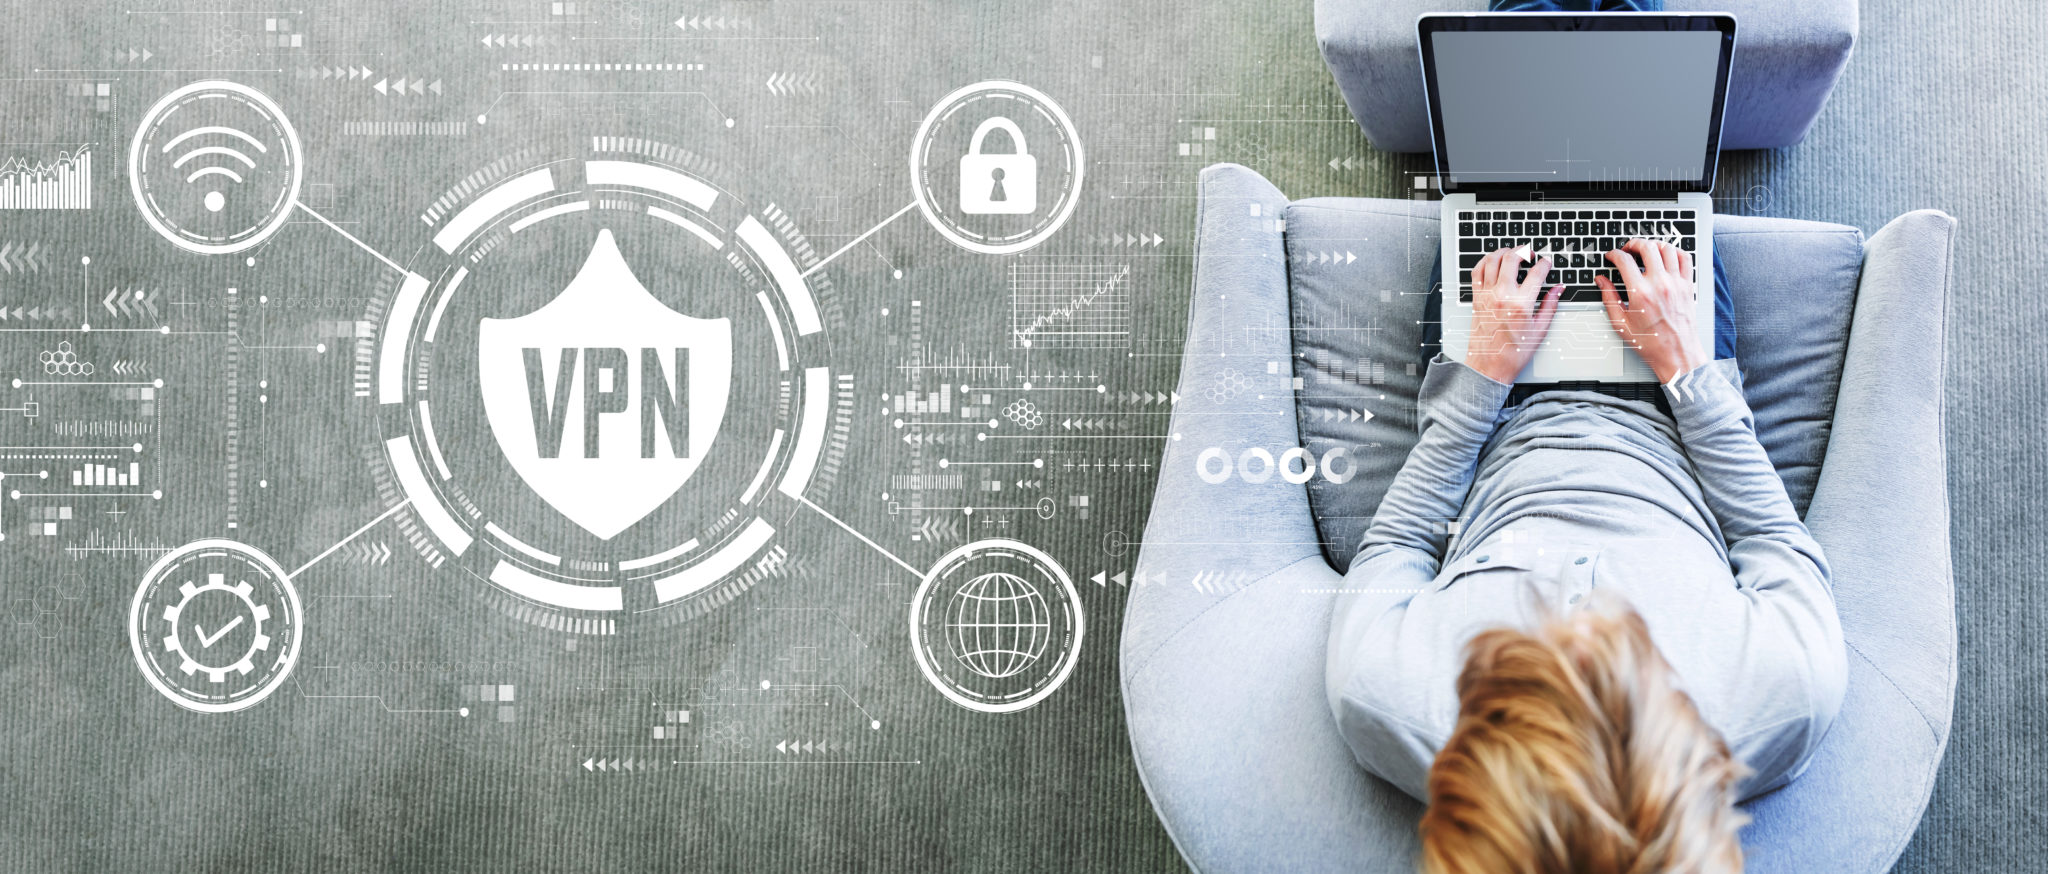 how to make a vpn network